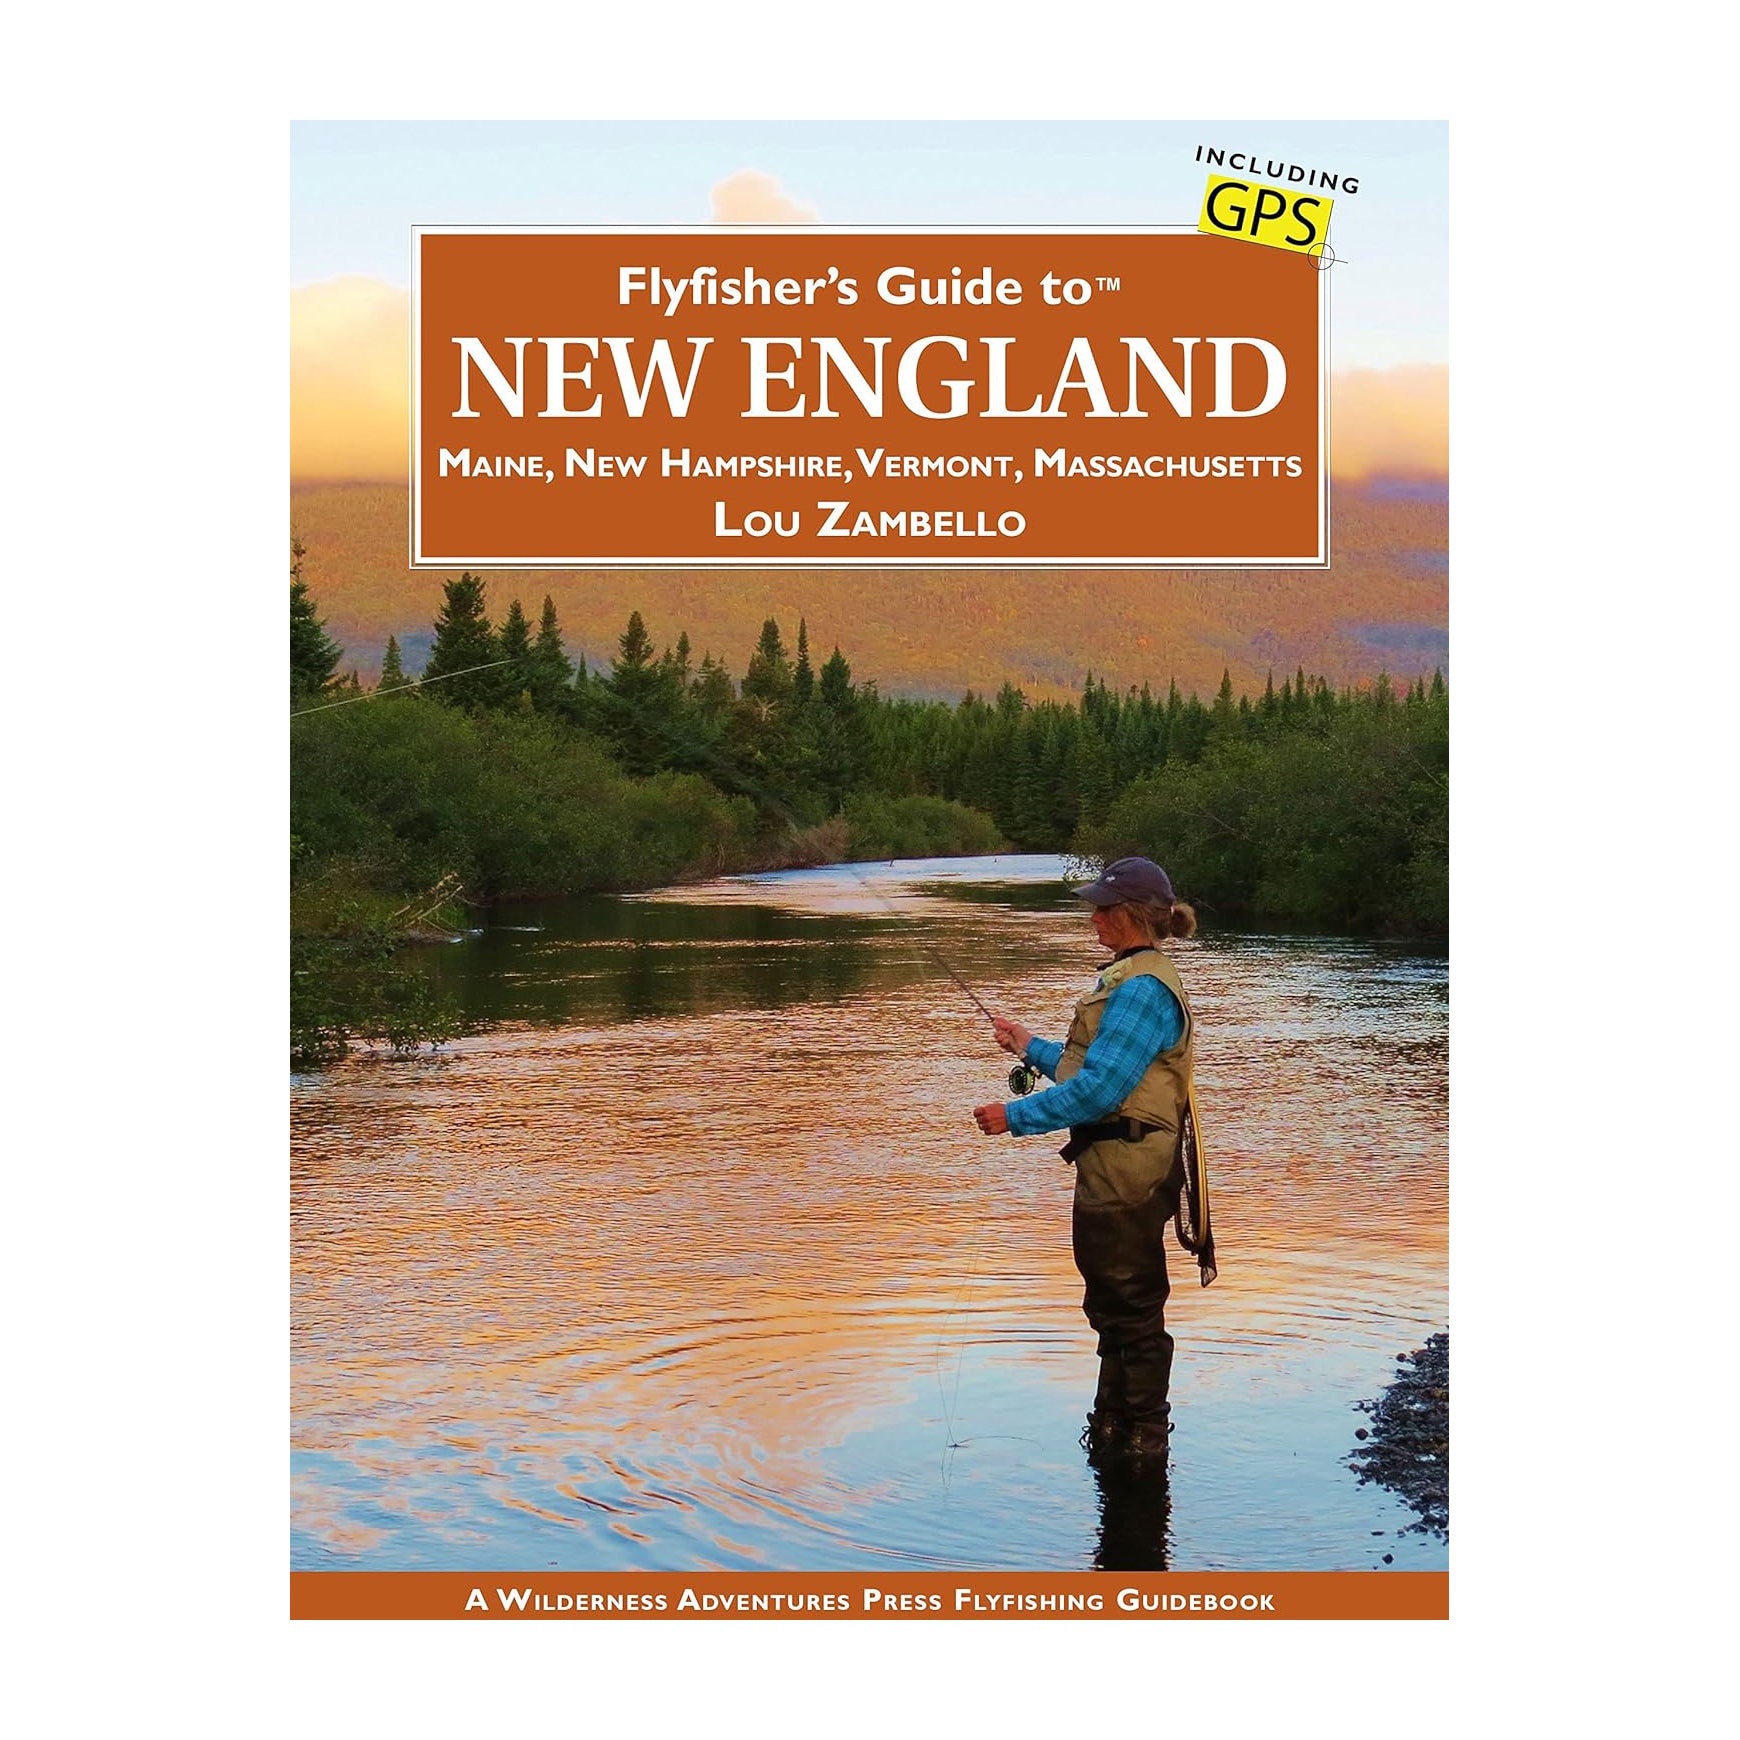 Flyfisher's Guide to New England